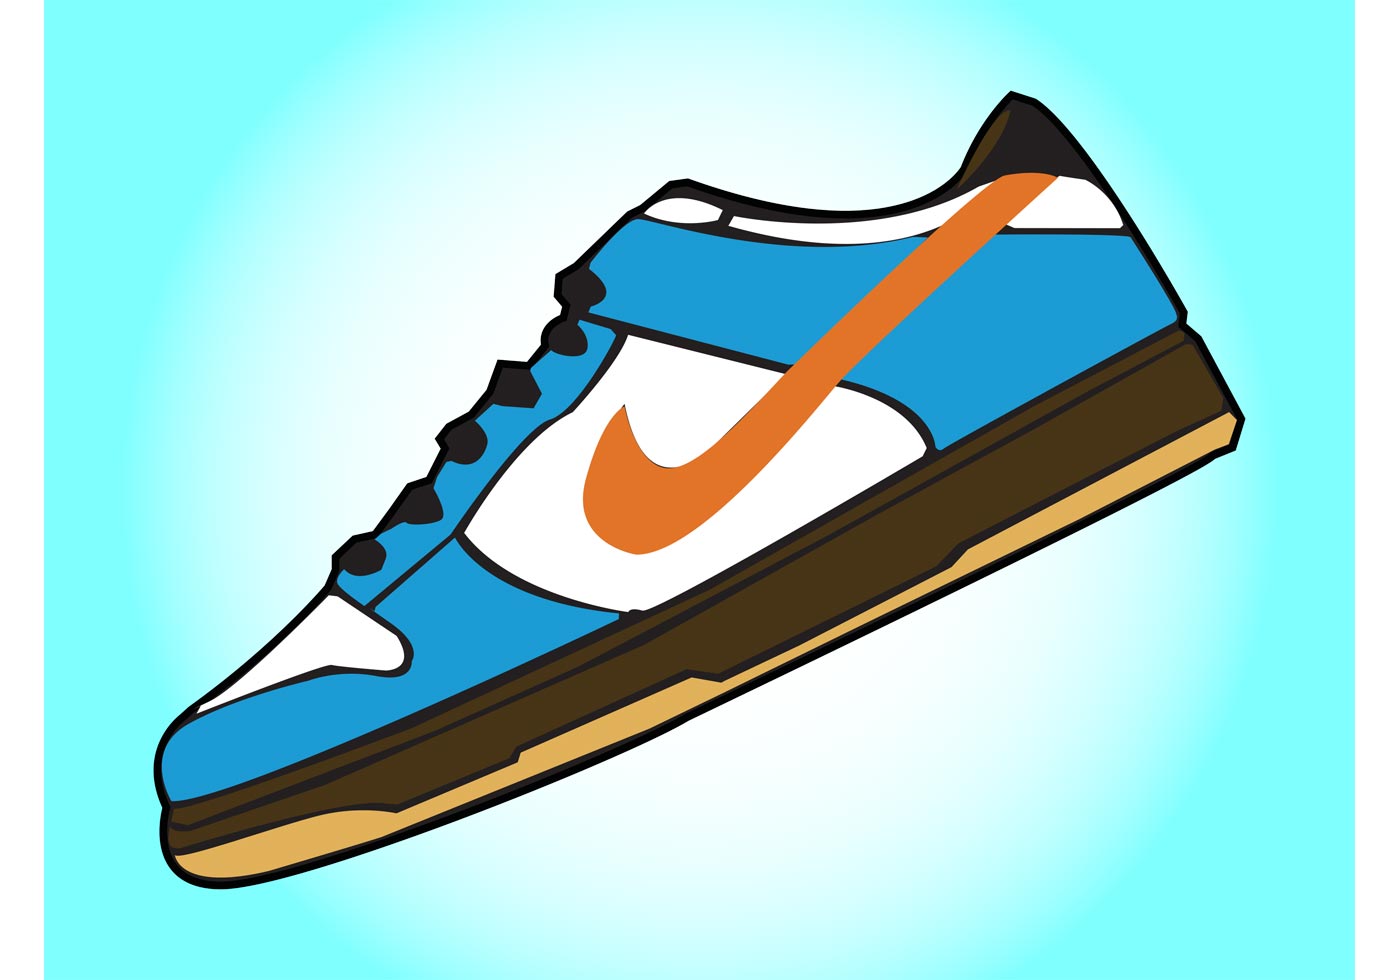 Shoes Free Vector Art - (3961 Free Downloads)